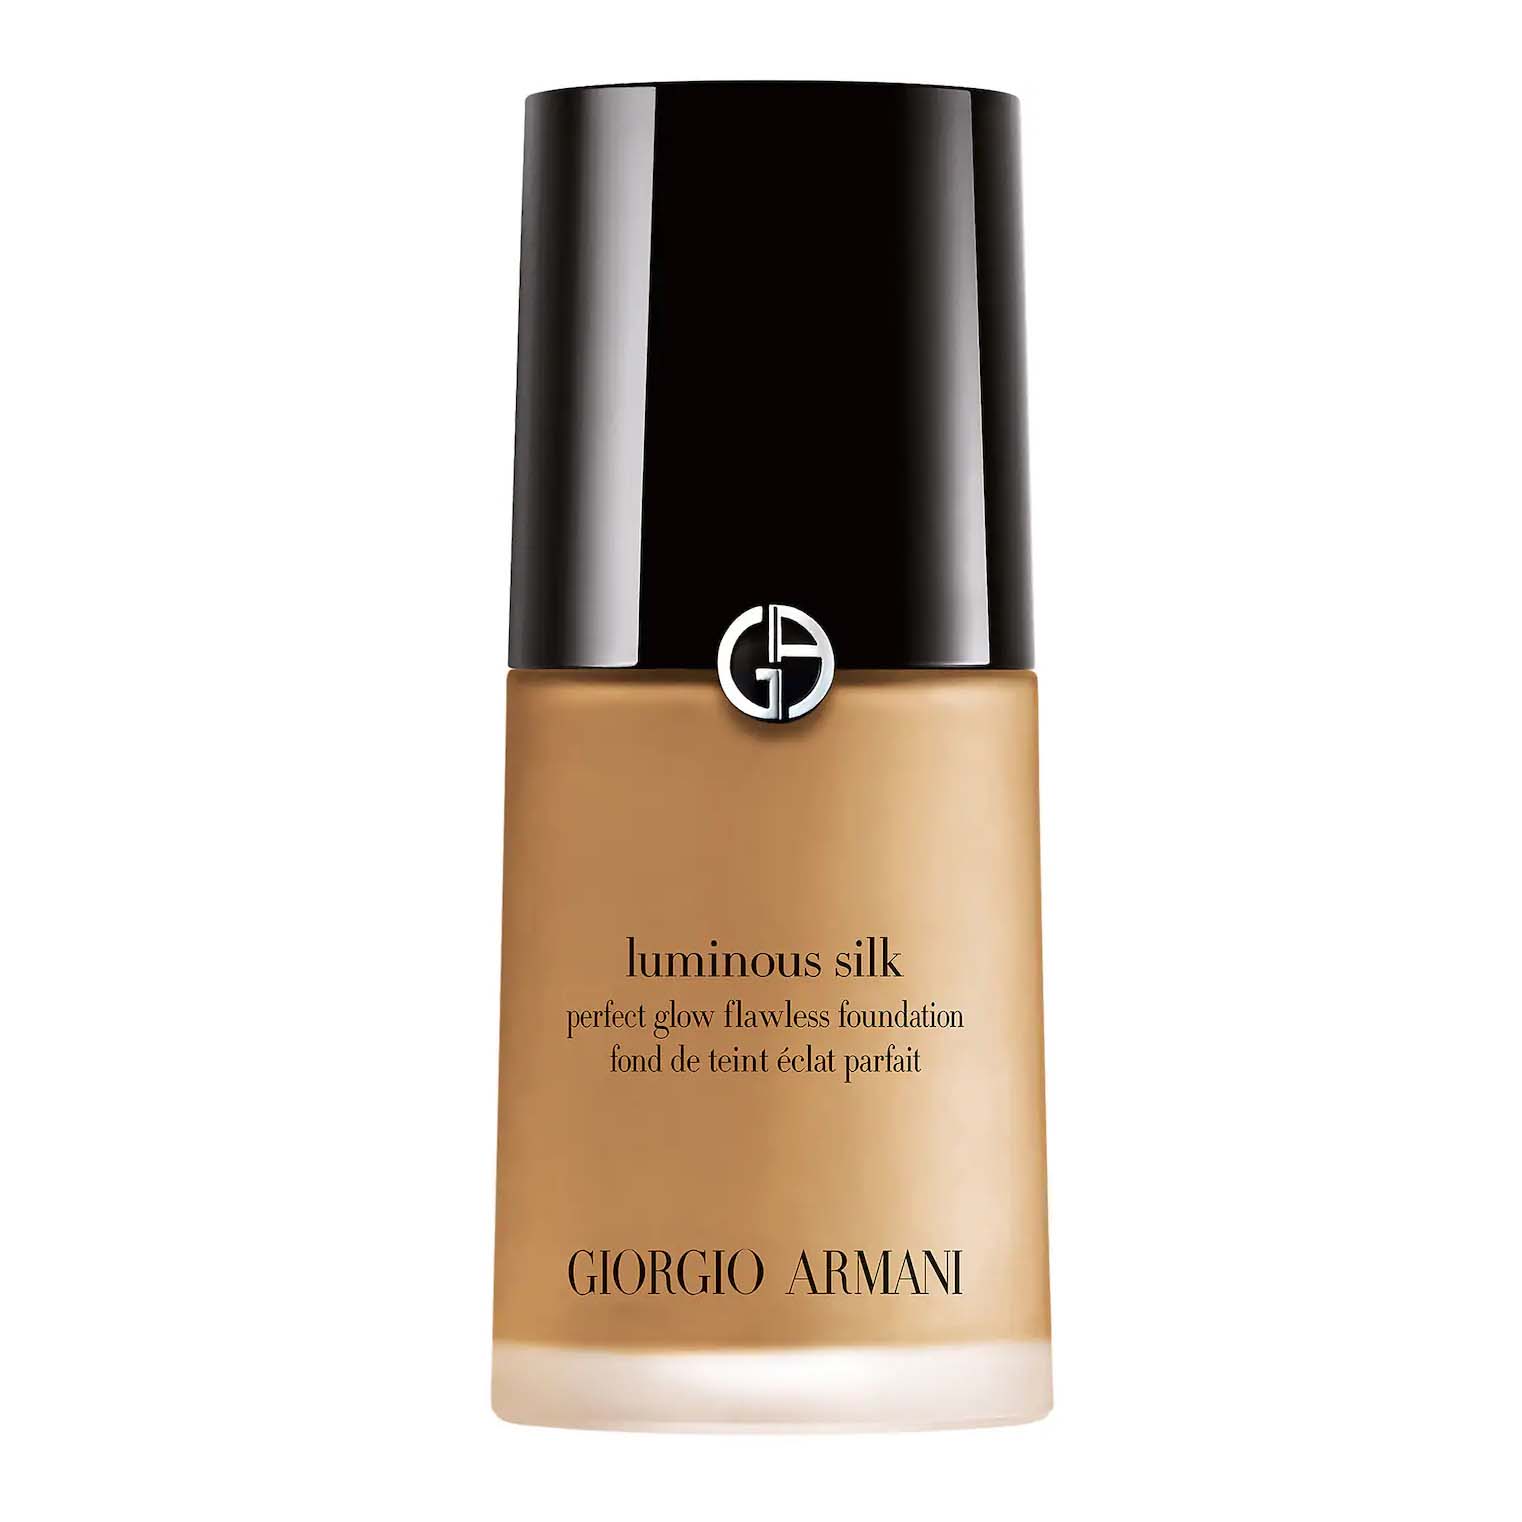 Armani Beauty Luminous Silk Perfect Glow Flawless Oil-Free Foundation in the shade tan, olive